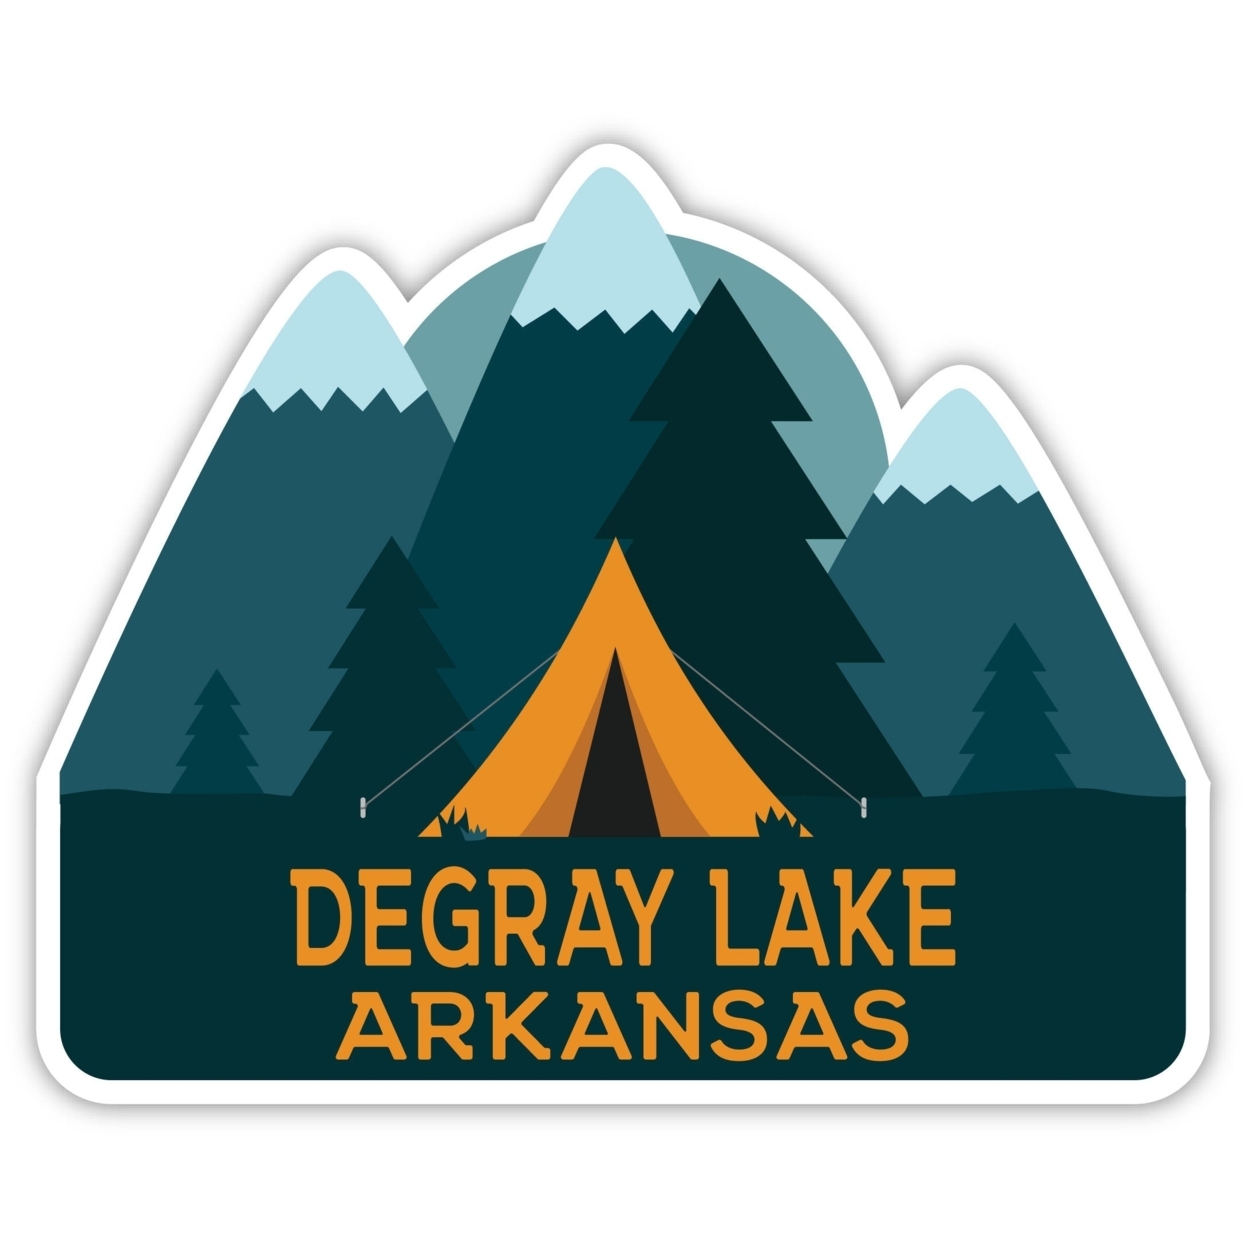 DeGray Lake Arkansas Souvenir Decorative Stickers (Choose Theme And Size) - 4-Pack, 10-Inch, Tent